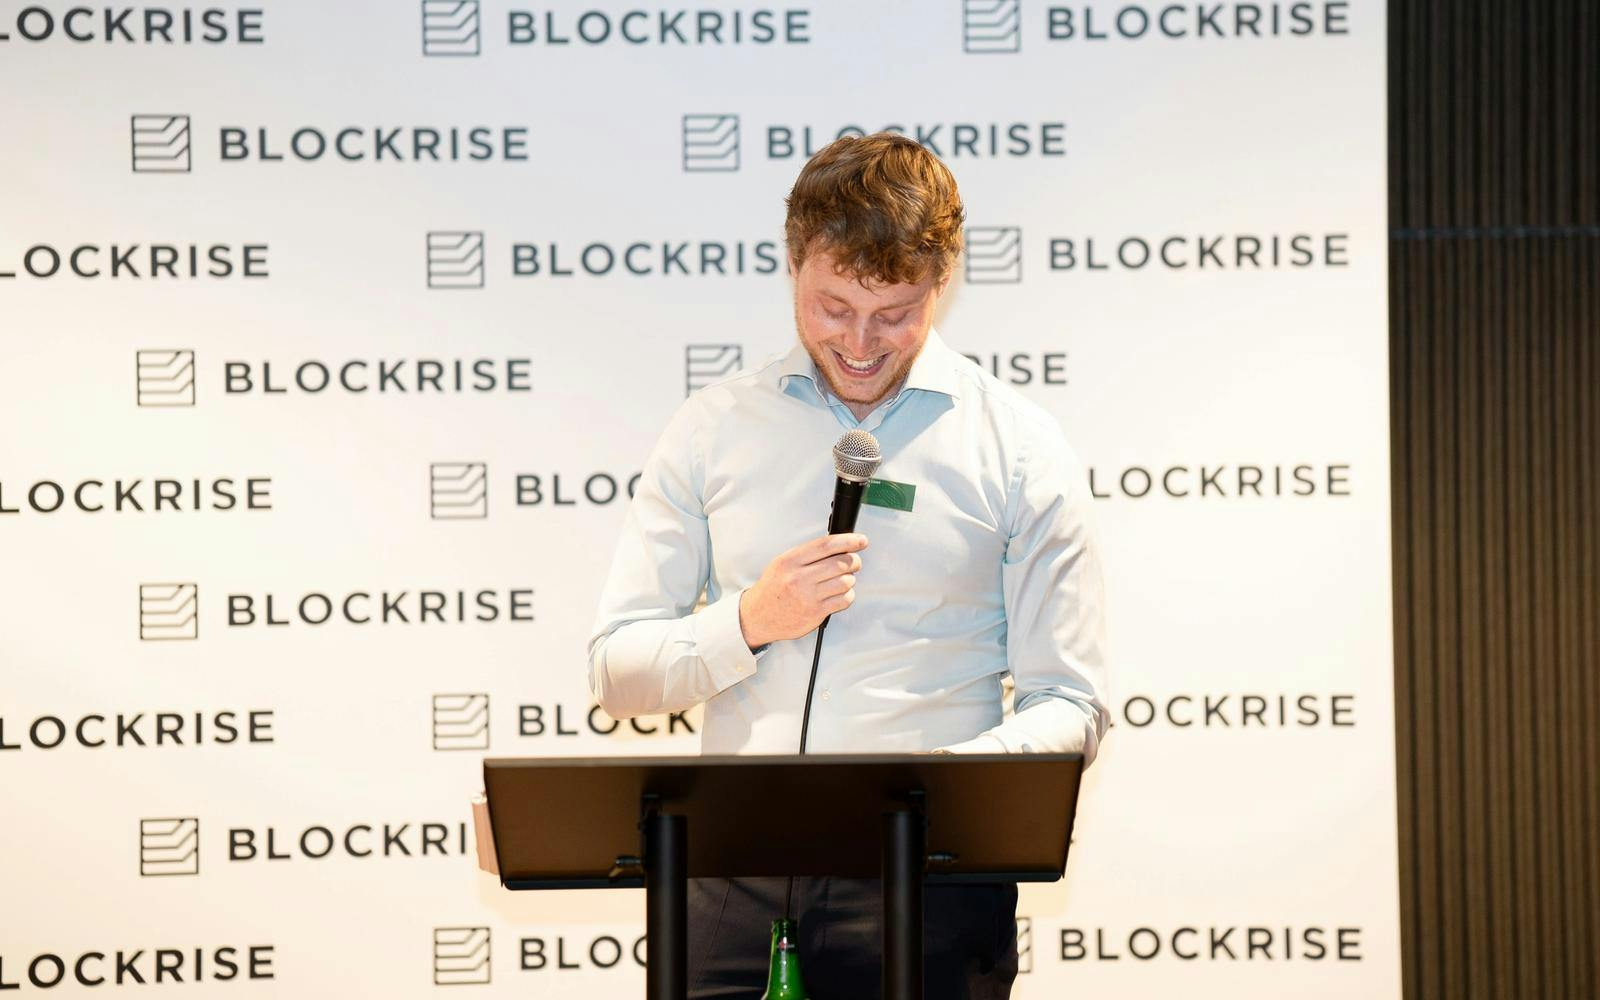 CEO Jos speaking at event